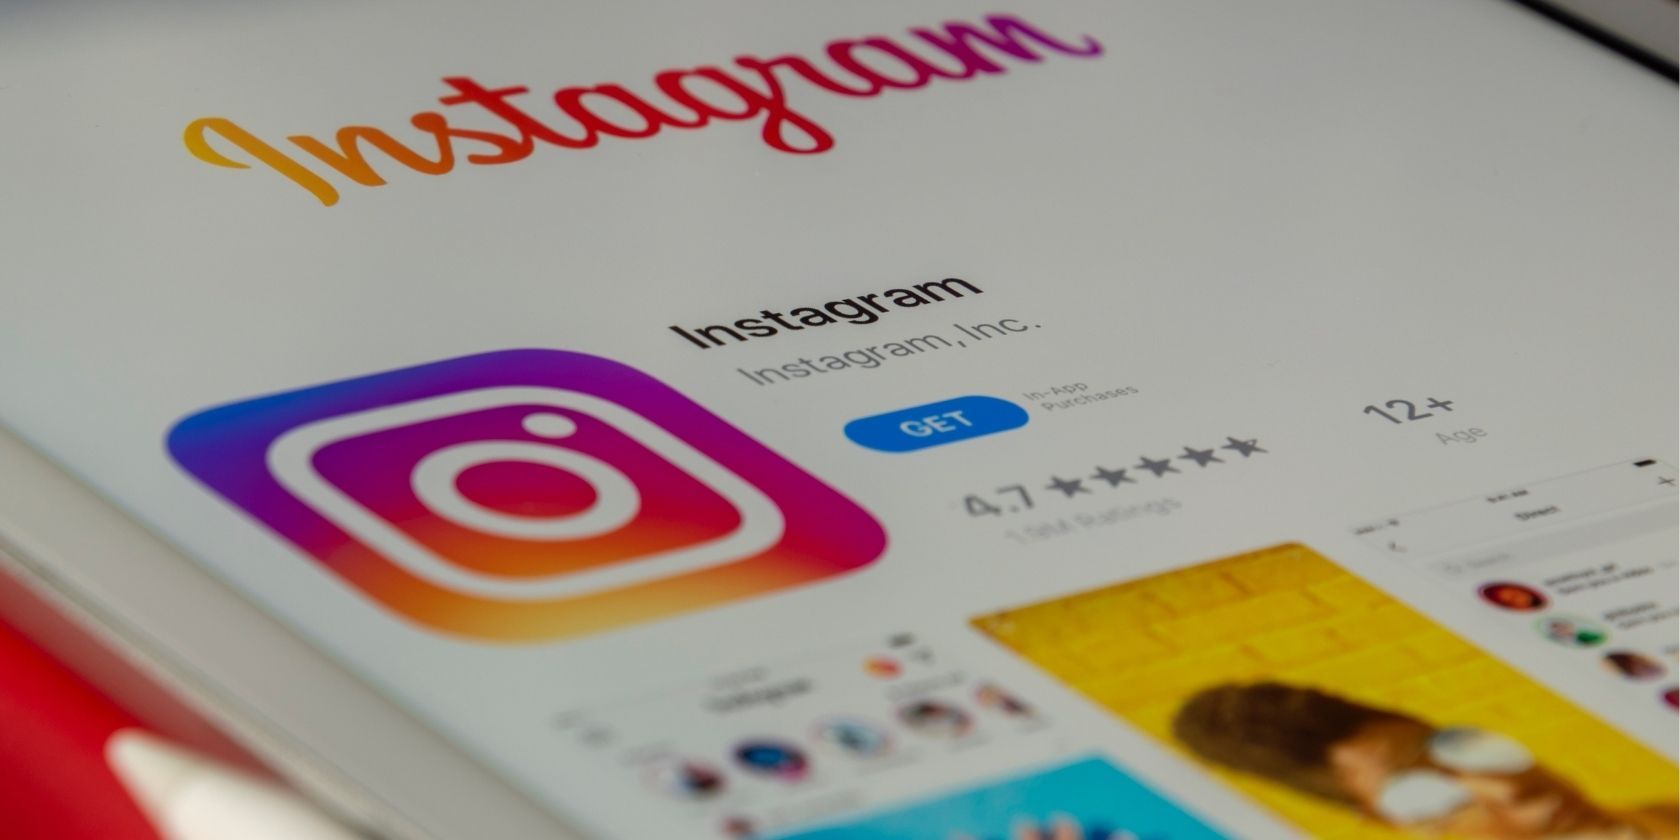 5 Tips to Run Your Instagram Business Profile More Efficiently